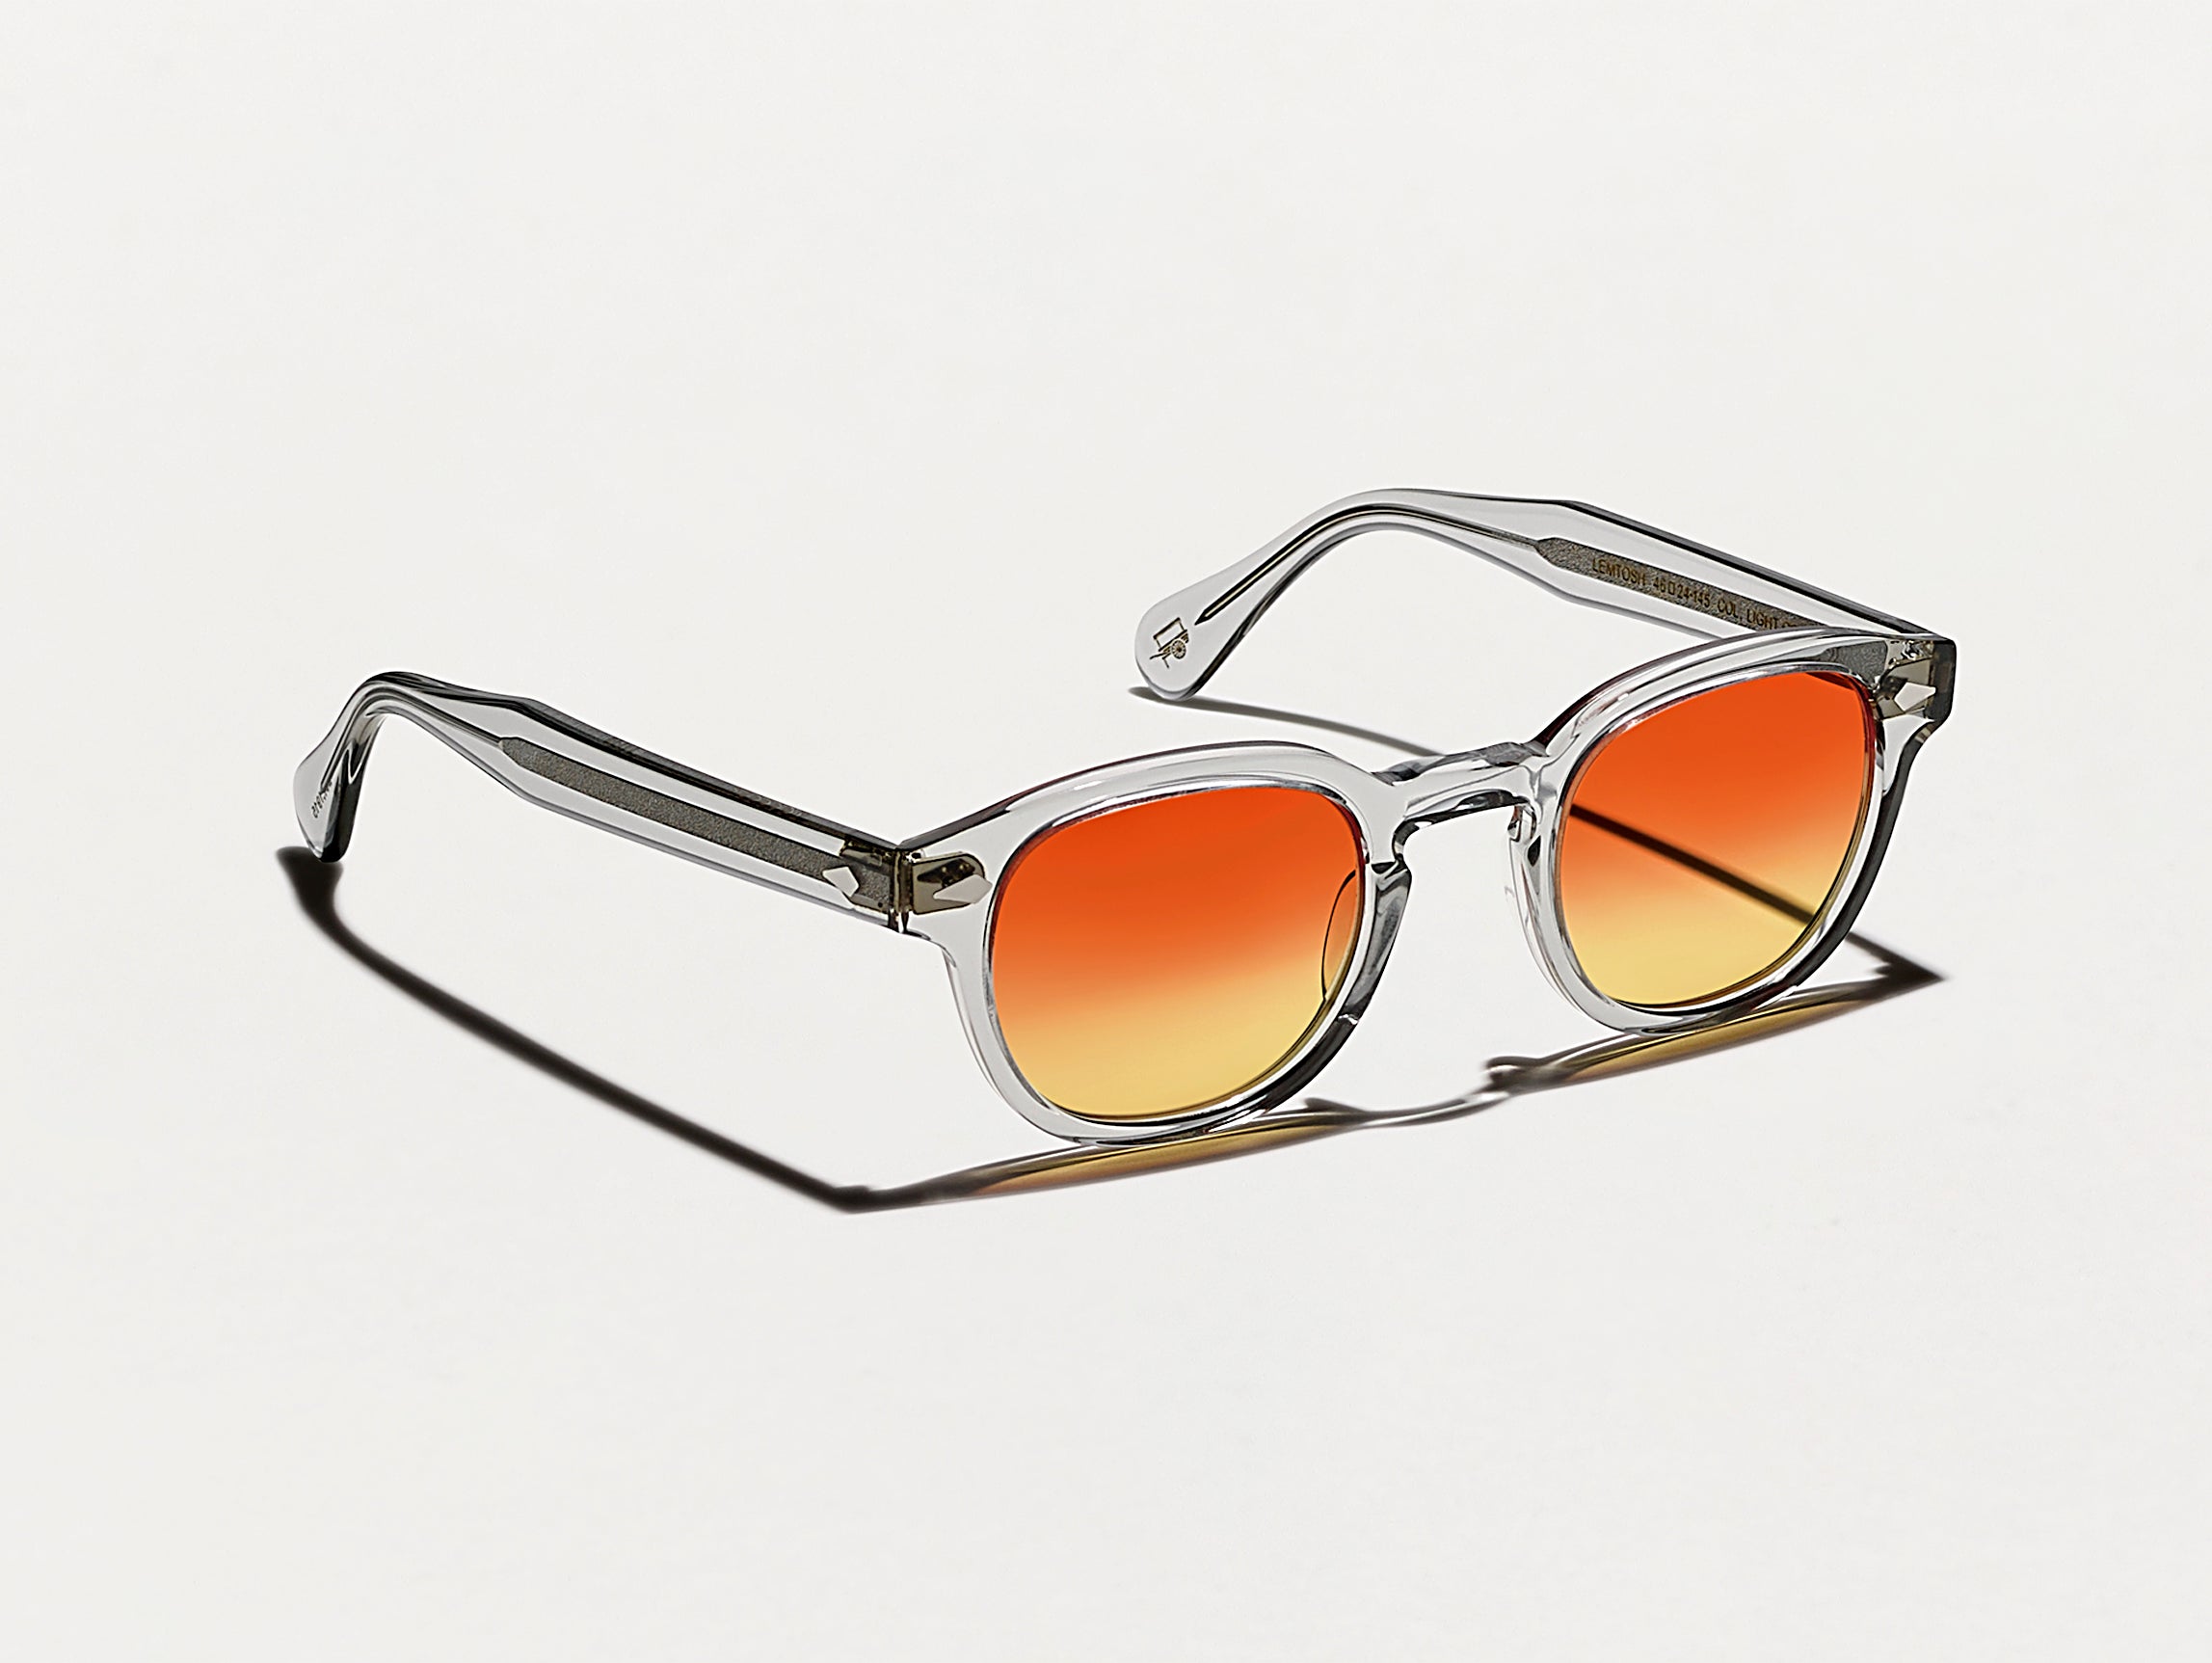 The LEMTOSH Light Grey with Candy Corn Tinted Lenses